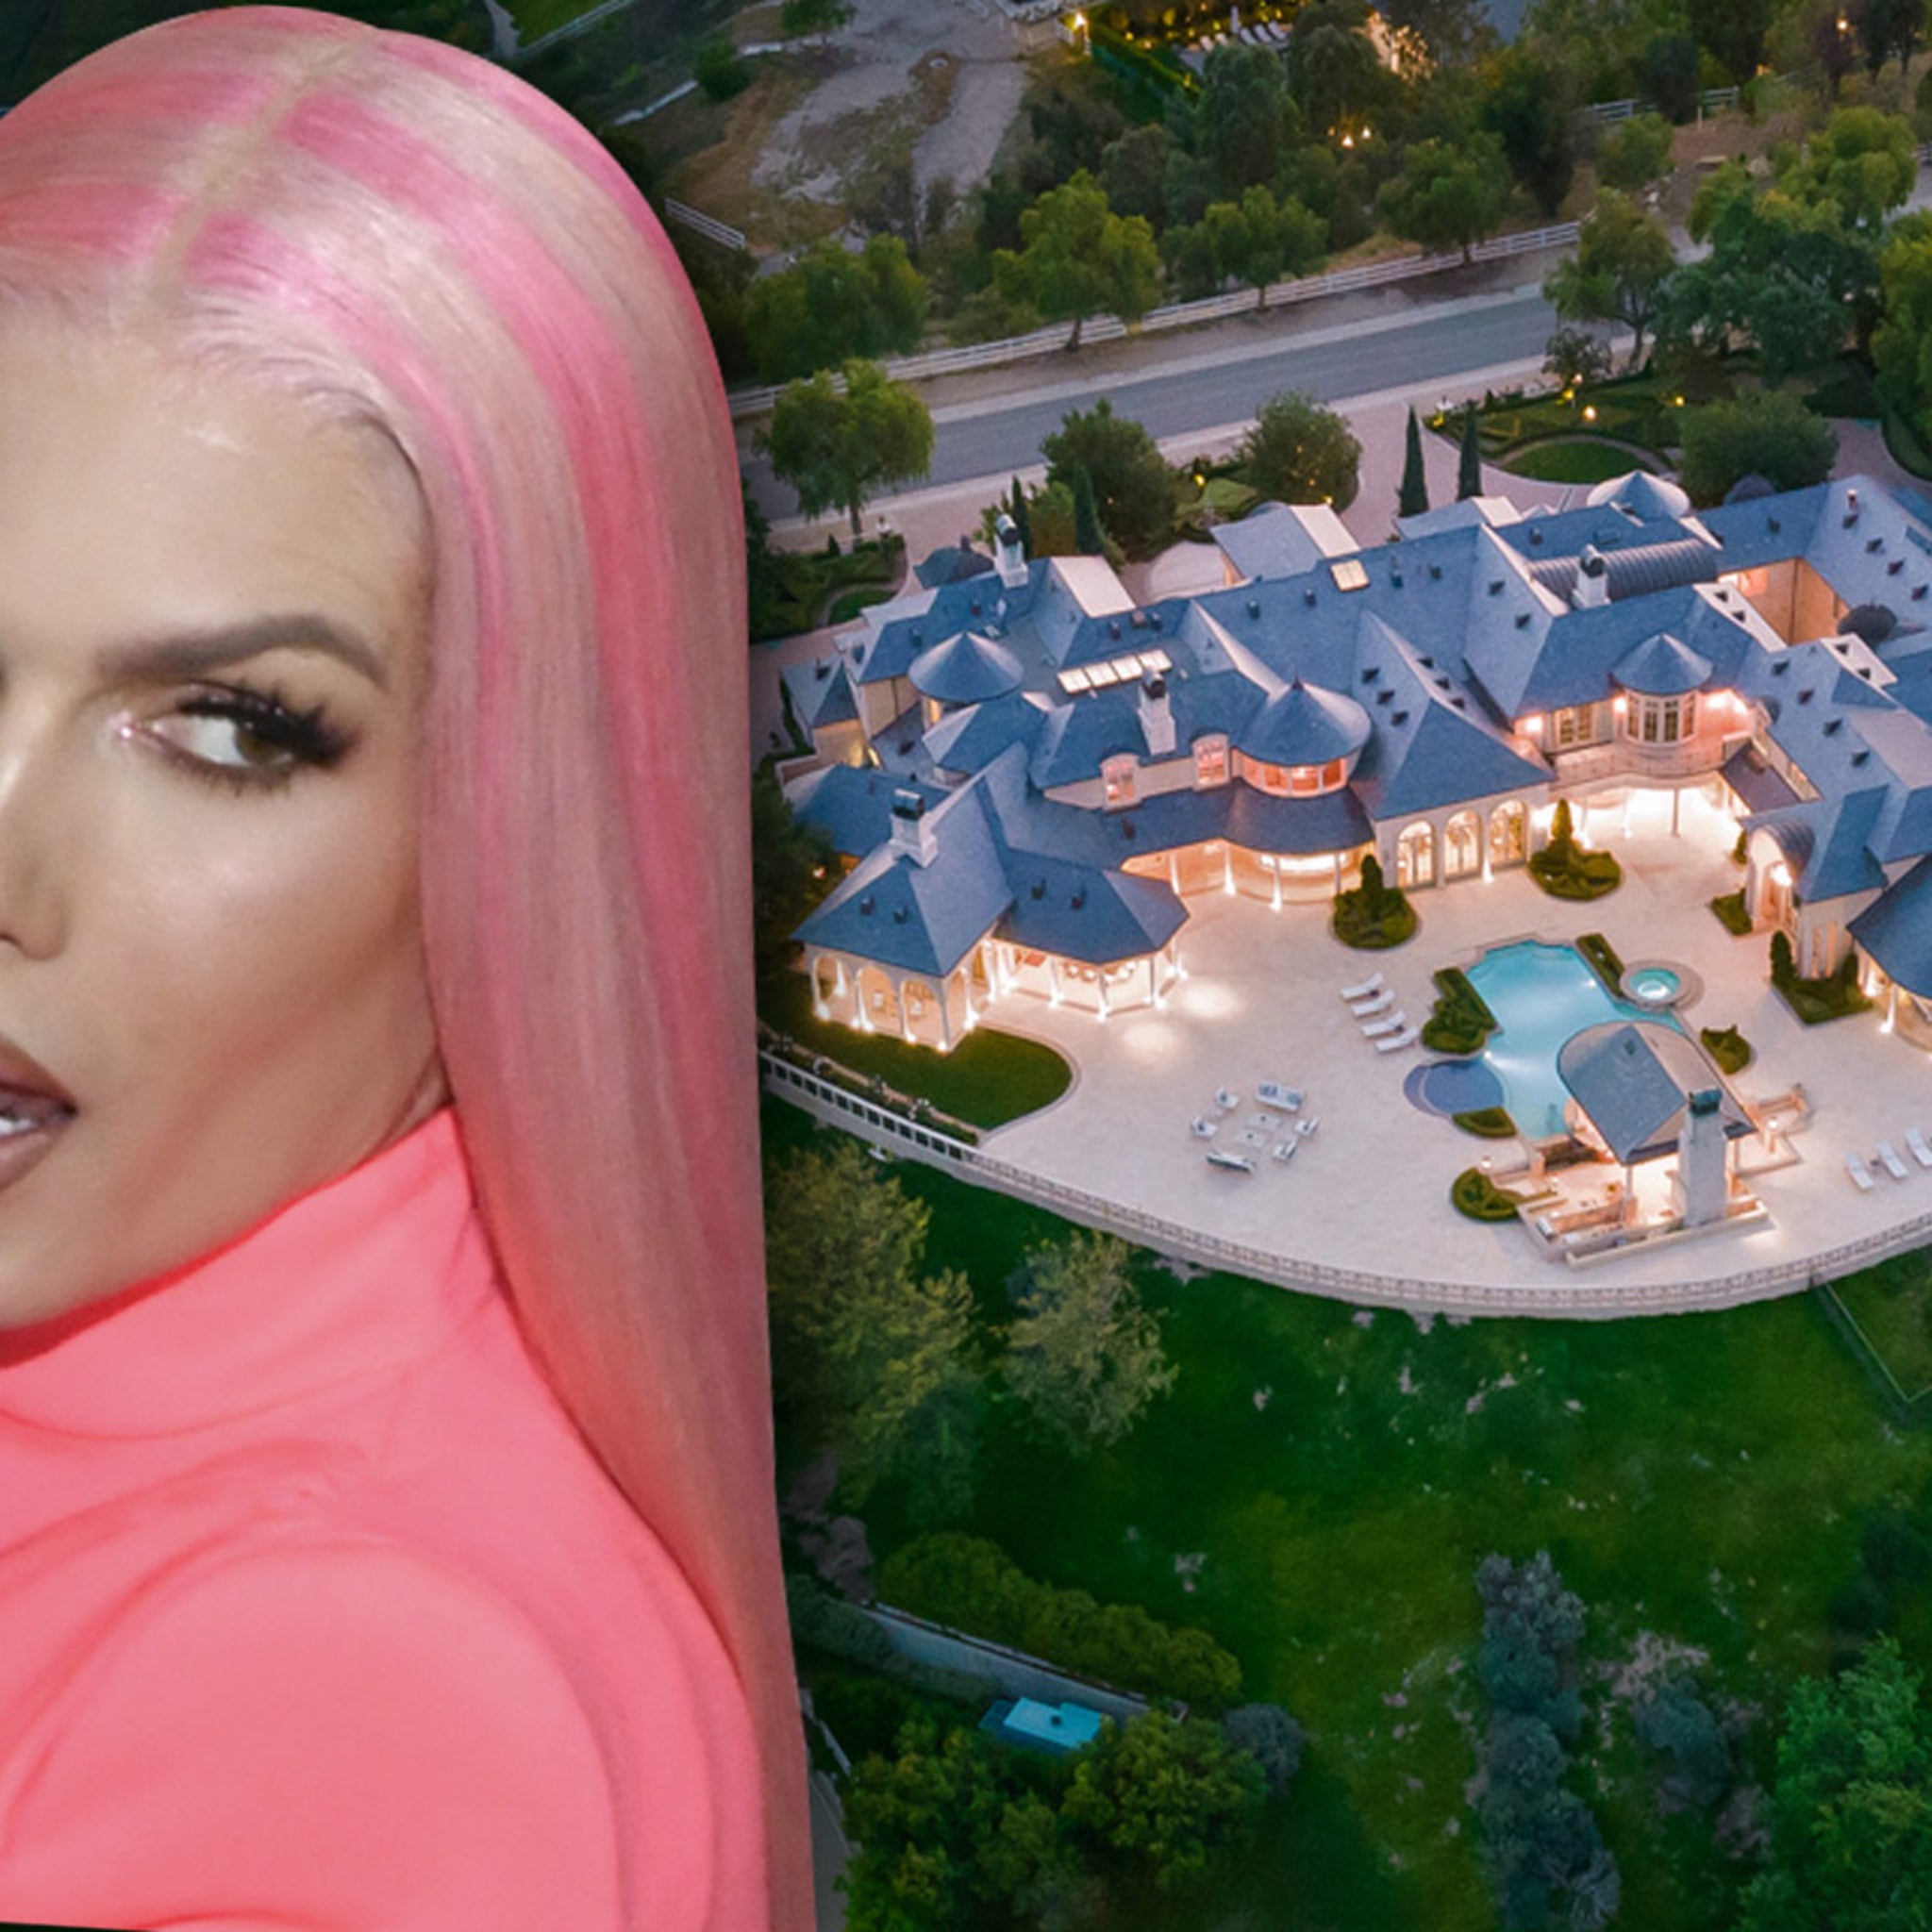 Jeffree Star Is Selling His Gorgeous Hidden Hills Mansion With